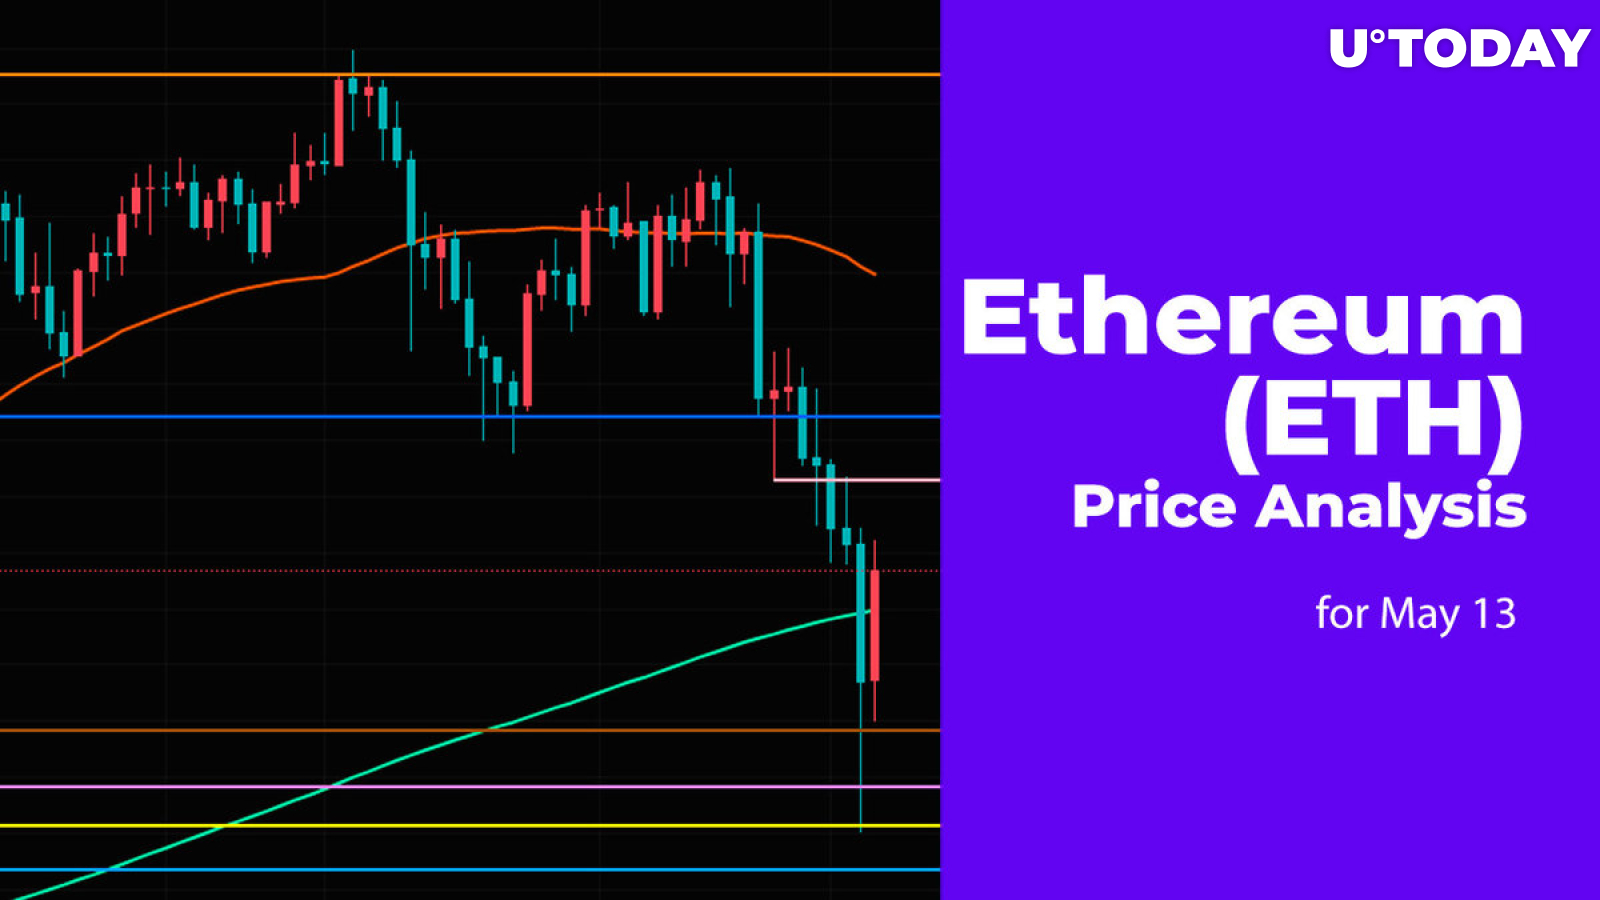 Ethereum (ETH) Price Analysis for May 13